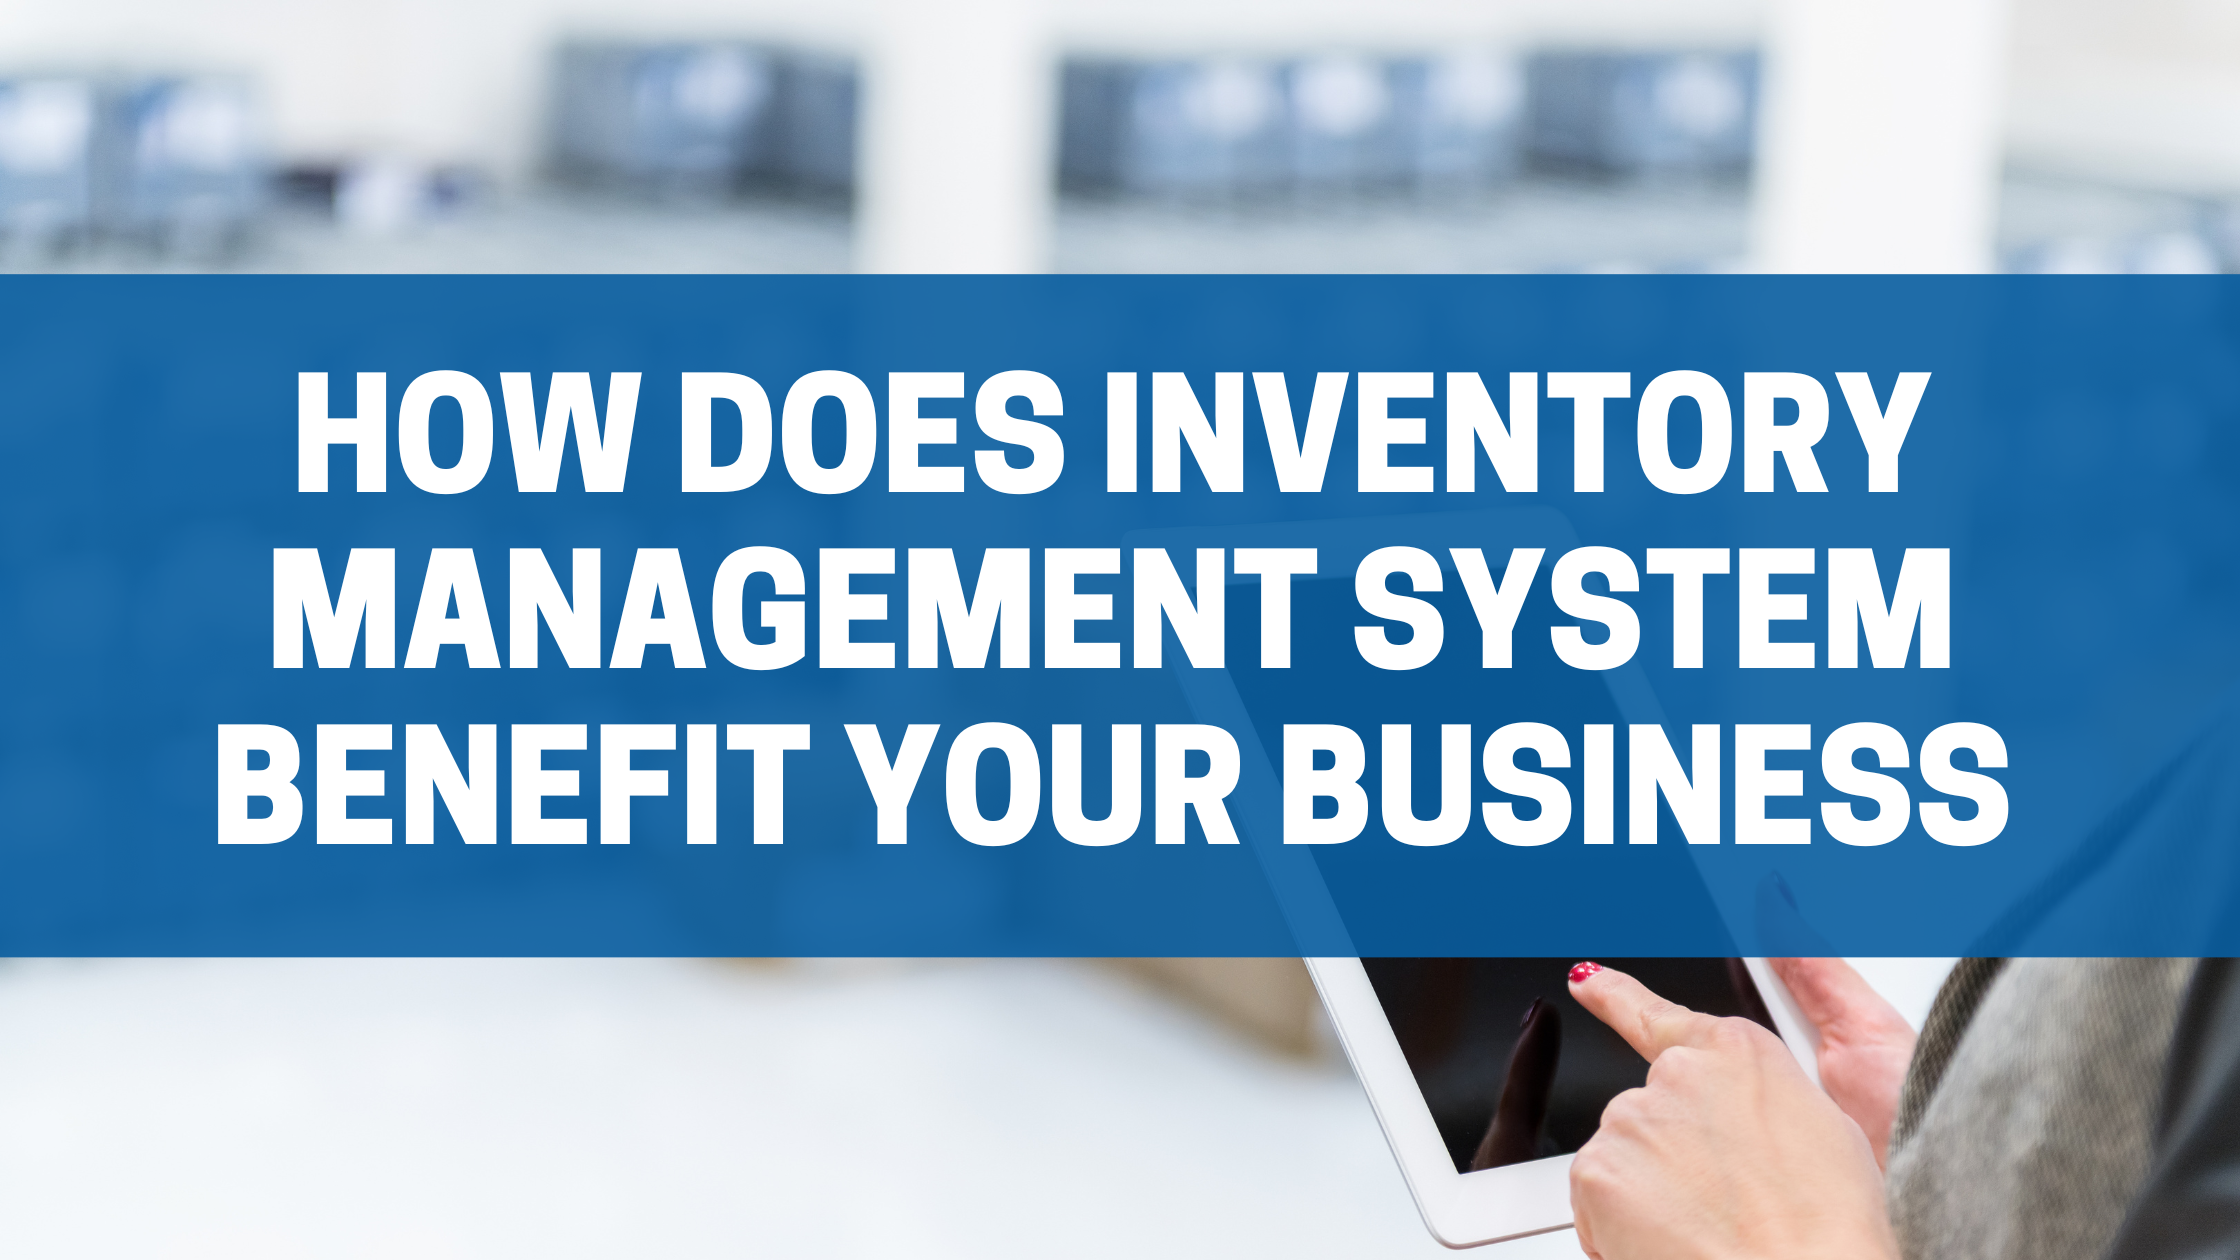 How Does Inventory Management System Benefit Your Business?